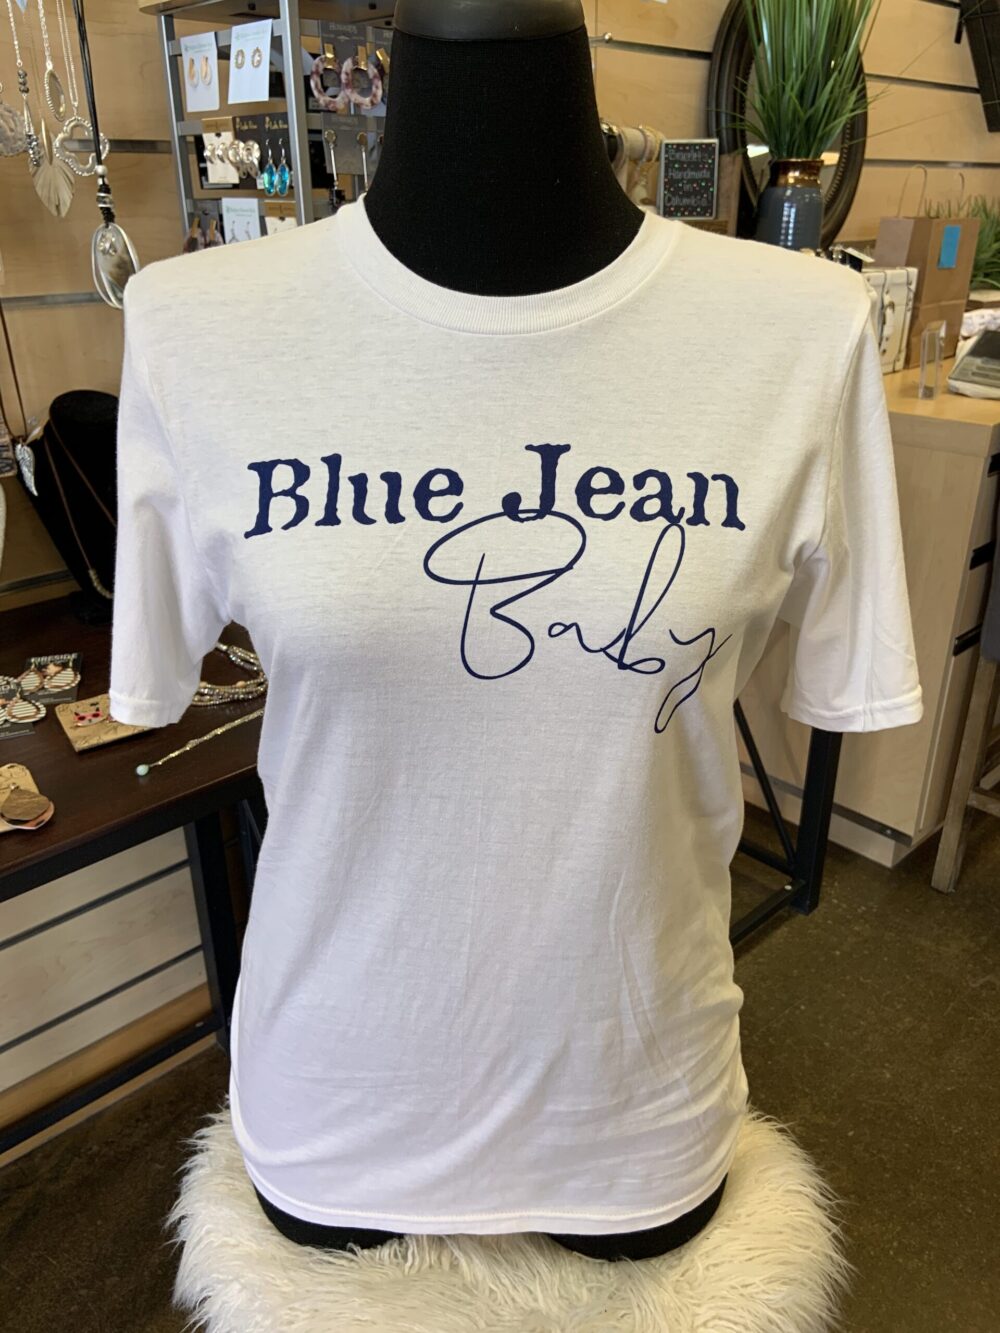 Blue Jean Baby Graphic Tee Shirt